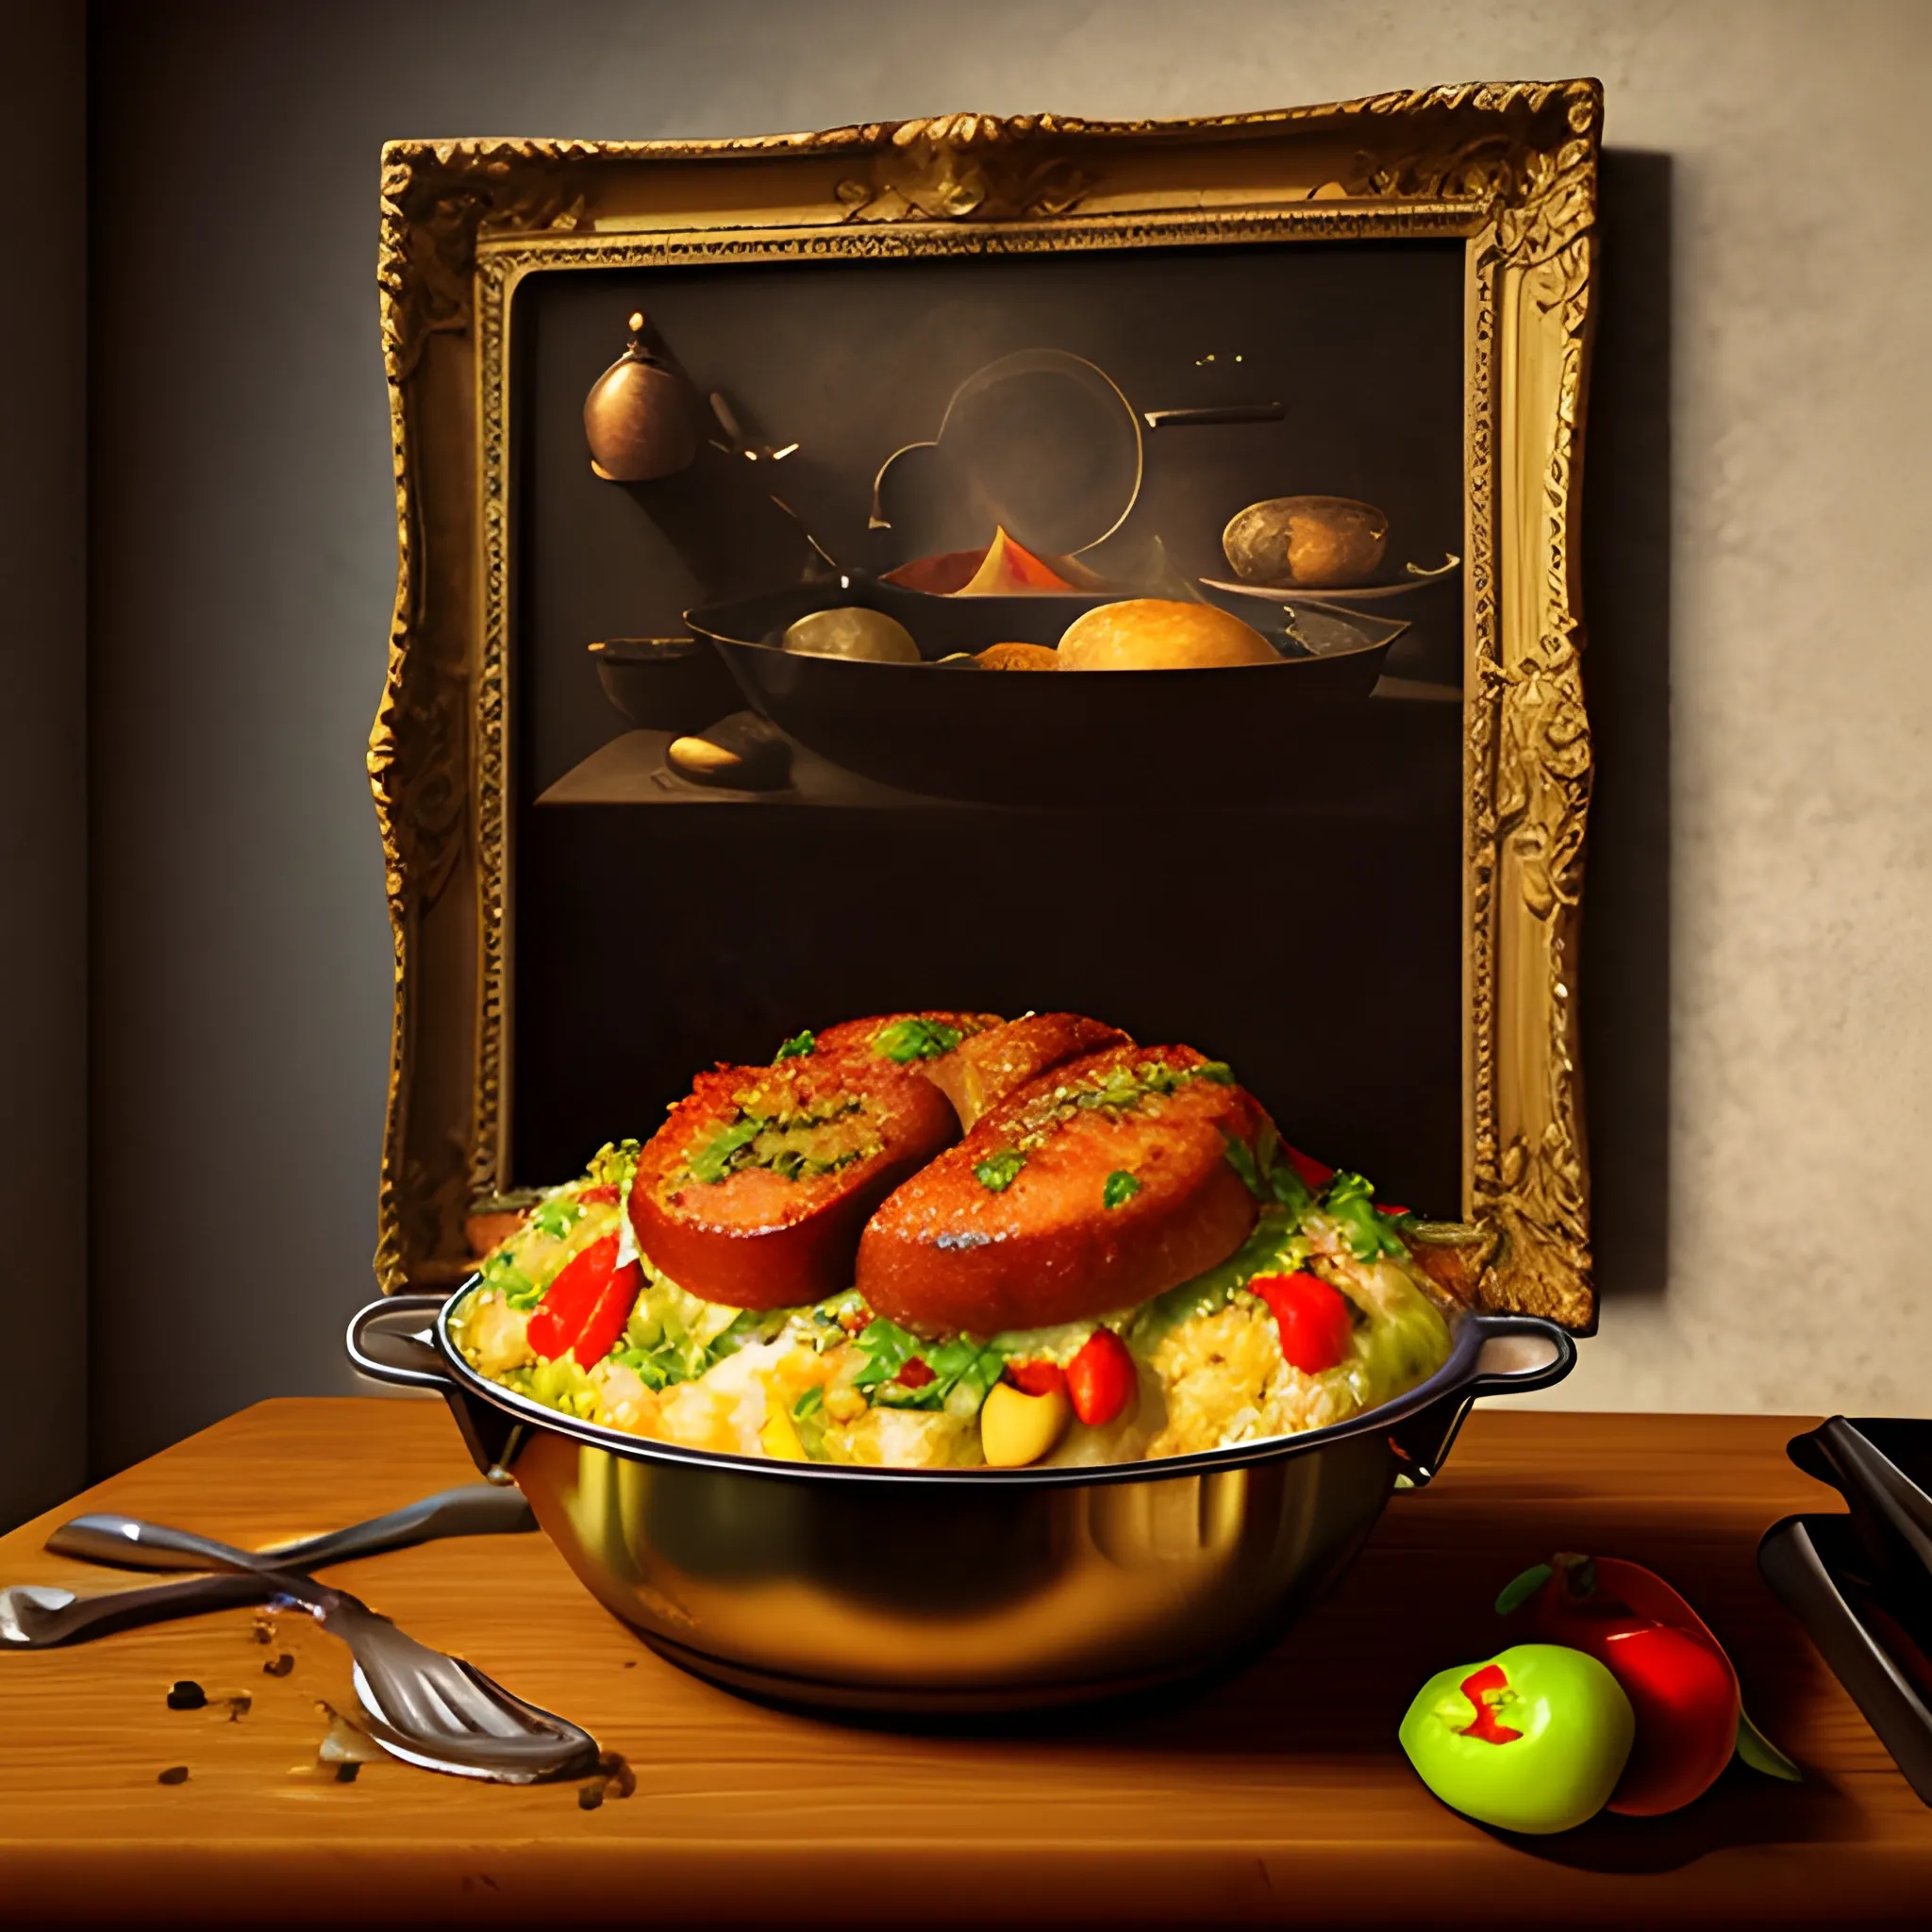 Cooking, delicious, shiny, food photography, art by Rembrandt., 3D